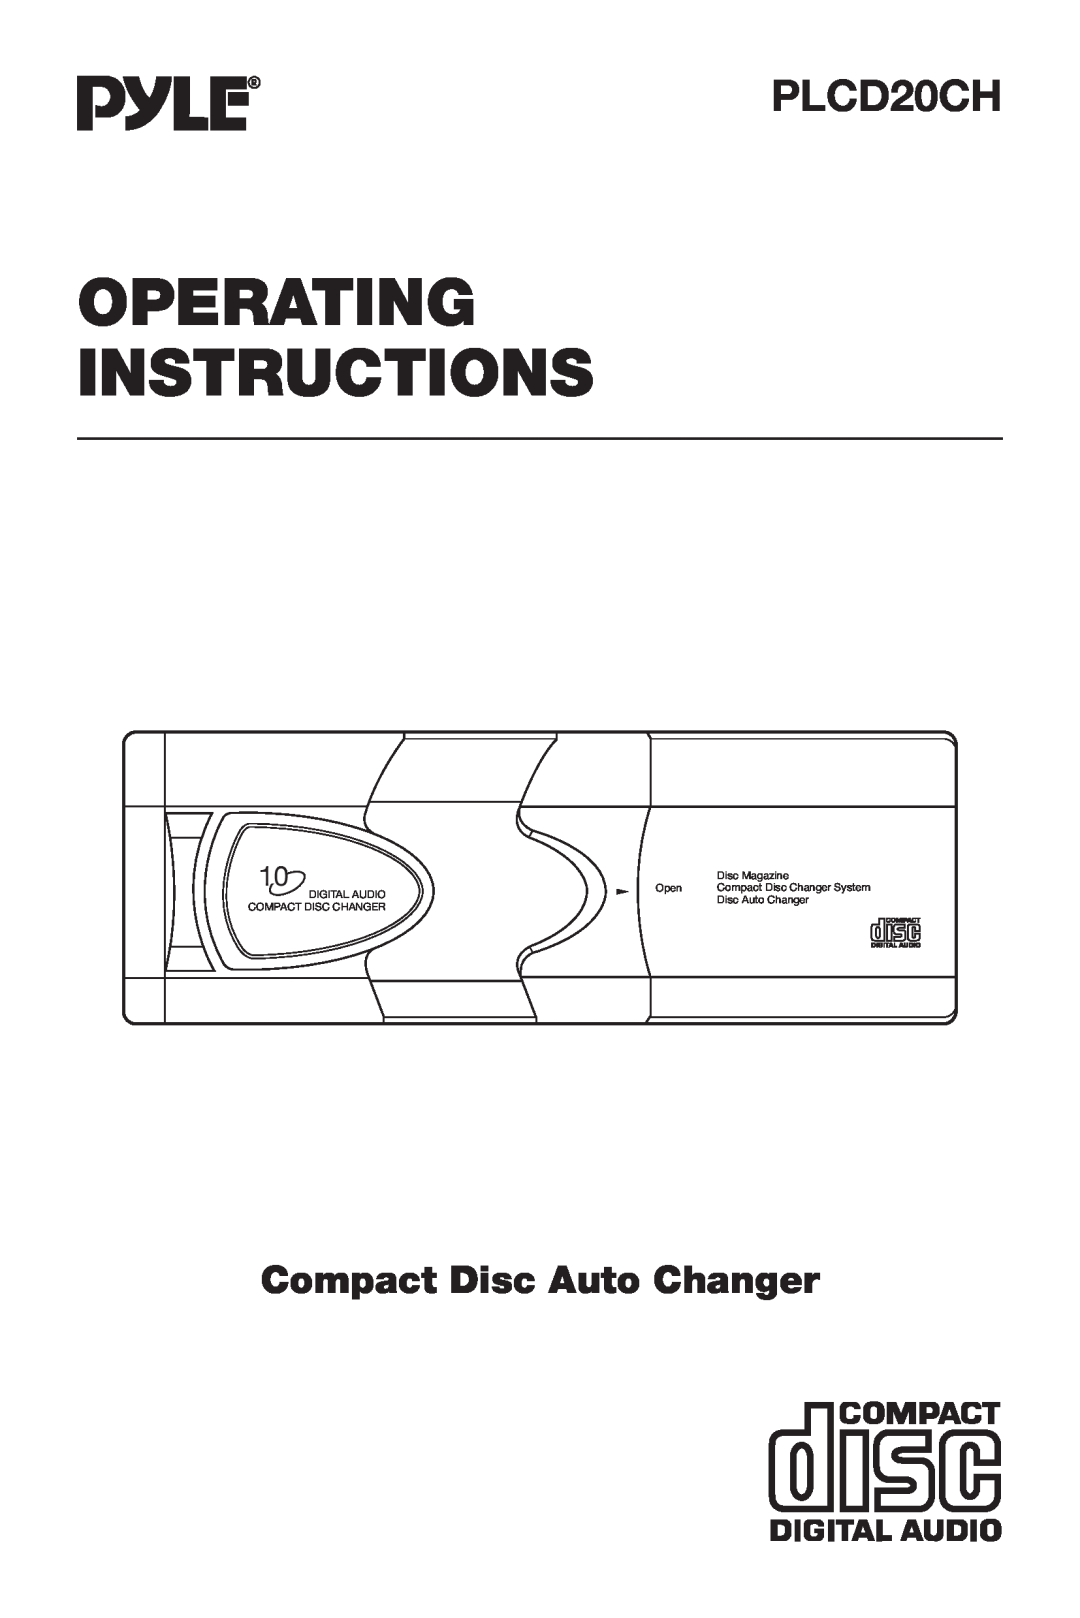 PYLE Audio PLCD20CH manual Operating Instructions, Compact Disc Auto Changer, Disc Magazine, Open, Digital Audio 